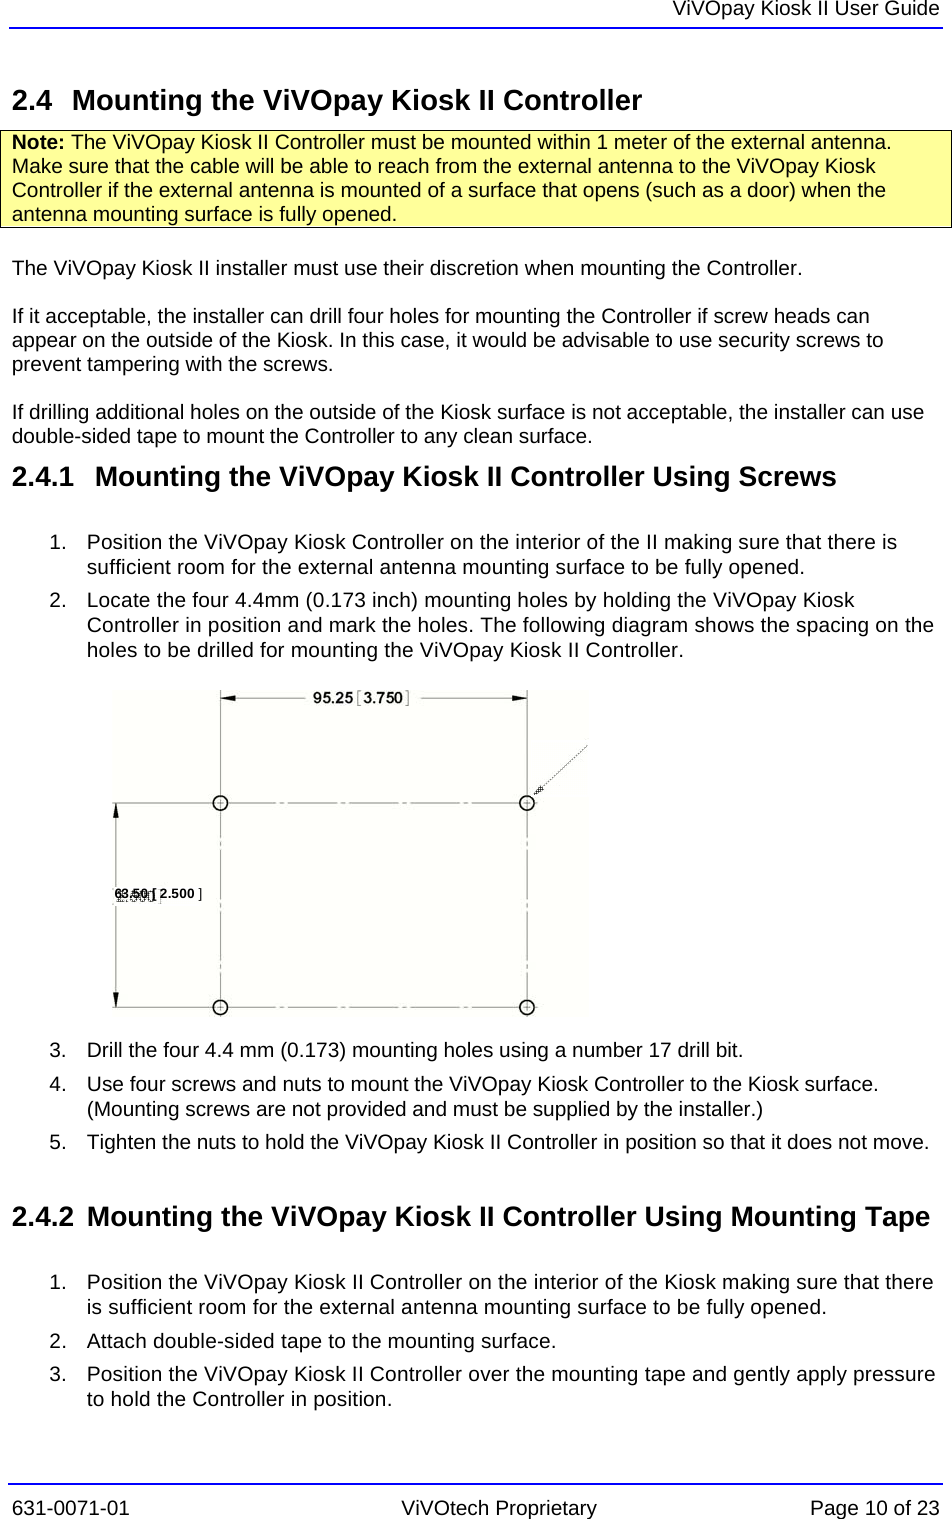   ViVOpay Kiosk II User Guide  631-0071-01 ViVOtech Proprietary Page 10 of 23 2.4  Mounting the ViVOpay Kiosk II Controller Note: The ViVOpay Kiosk II Controller must be mounted within 1 meter of the external antenna. Make sure that the cable will be able to reach from the external antenna to the ViVOpay Kiosk Controller if the external antenna is mounted of a surface that opens (such as a door) when the antenna mounting surface is fully opened.   The ViVOpay Kiosk II installer must use their discretion when mounting the Controller.   If it acceptable, the installer can drill four holes for mounting the Controller if screw heads can appear on the outside of the Kiosk. In this case, it would be advisable to use security screws to prevent tampering with the screws.   If drilling additional holes on the outside of the Kiosk surface is not acceptable, the installer can use double-sided tape to mount the Controller to any clean surface.  2.4.1   Mounting the ViVOpay Kiosk II Controller Using Screws  1.  Position the ViVOpay Kiosk Controller on the interior of the II making sure that there is sufficient room for the external antenna mounting surface to be fully opened. 63.50 [ 2.500 ]2.  Locate the four 4.4mm (0.173 inch) mounting holes by holding the ViVOpay Kiosk Controller in position and mark the holes. The following diagram shows the spacing on the holes to be drilled for mounting the ViVOpay Kiosk II Controller.            3.  Drill the four 4.4 mm (0.173) mounting holes using a number 17 drill bit. 4.  Use four screws and nuts to mount the ViVOpay Kiosk Controller to the Kiosk surface. (Mounting screws are not provided and must be supplied by the installer.) 5.  Tighten the nuts to hold the ViVOpay Kiosk II Controller in position so that it does not move.  2.4.2  Mounting the ViVOpay Kiosk II Controller Using Mounting Tape  1.  Position the ViVOpay Kiosk II Controller on the interior of the Kiosk making sure that there is sufficient room for the external antenna mounting surface to be fully opened. 2.  Attach double-sided tape to the mounting surface. 3.  Position the ViVOpay Kiosk II Controller over the mounting tape and gently apply pressure to hold the Controller in position. 